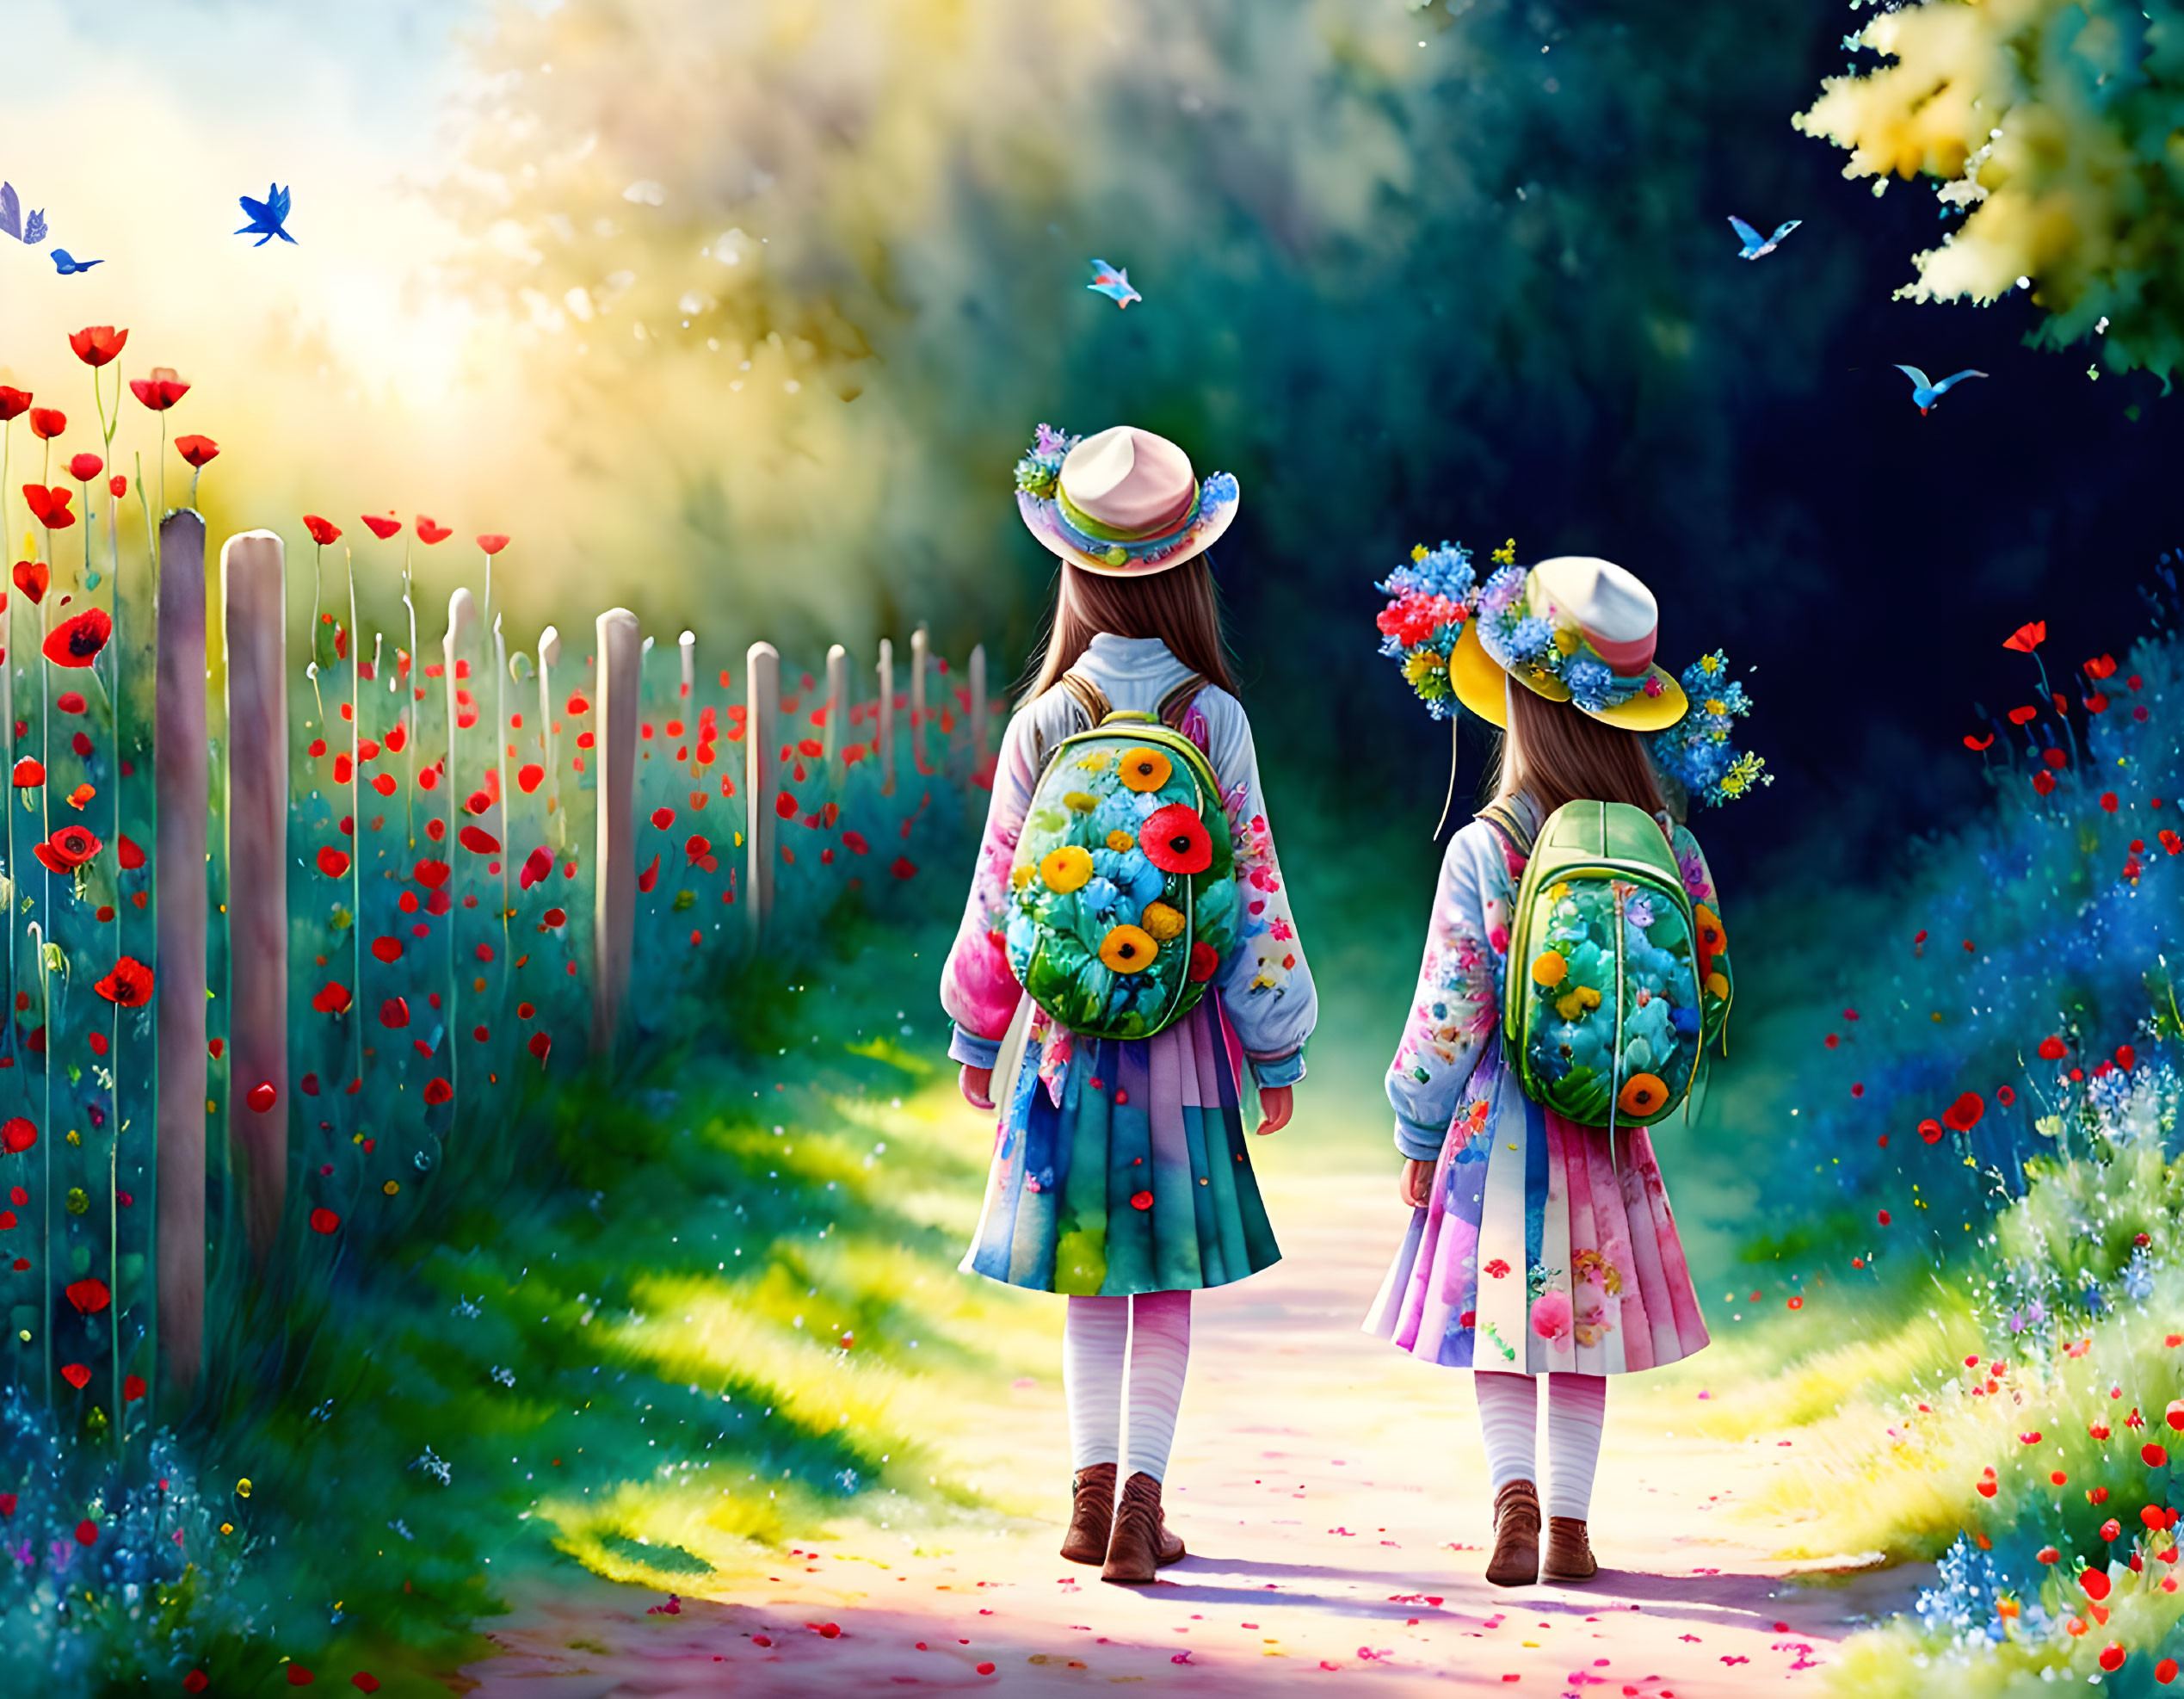 Two girls in floral dresses walking on flower-lined path with fence and butterflies.